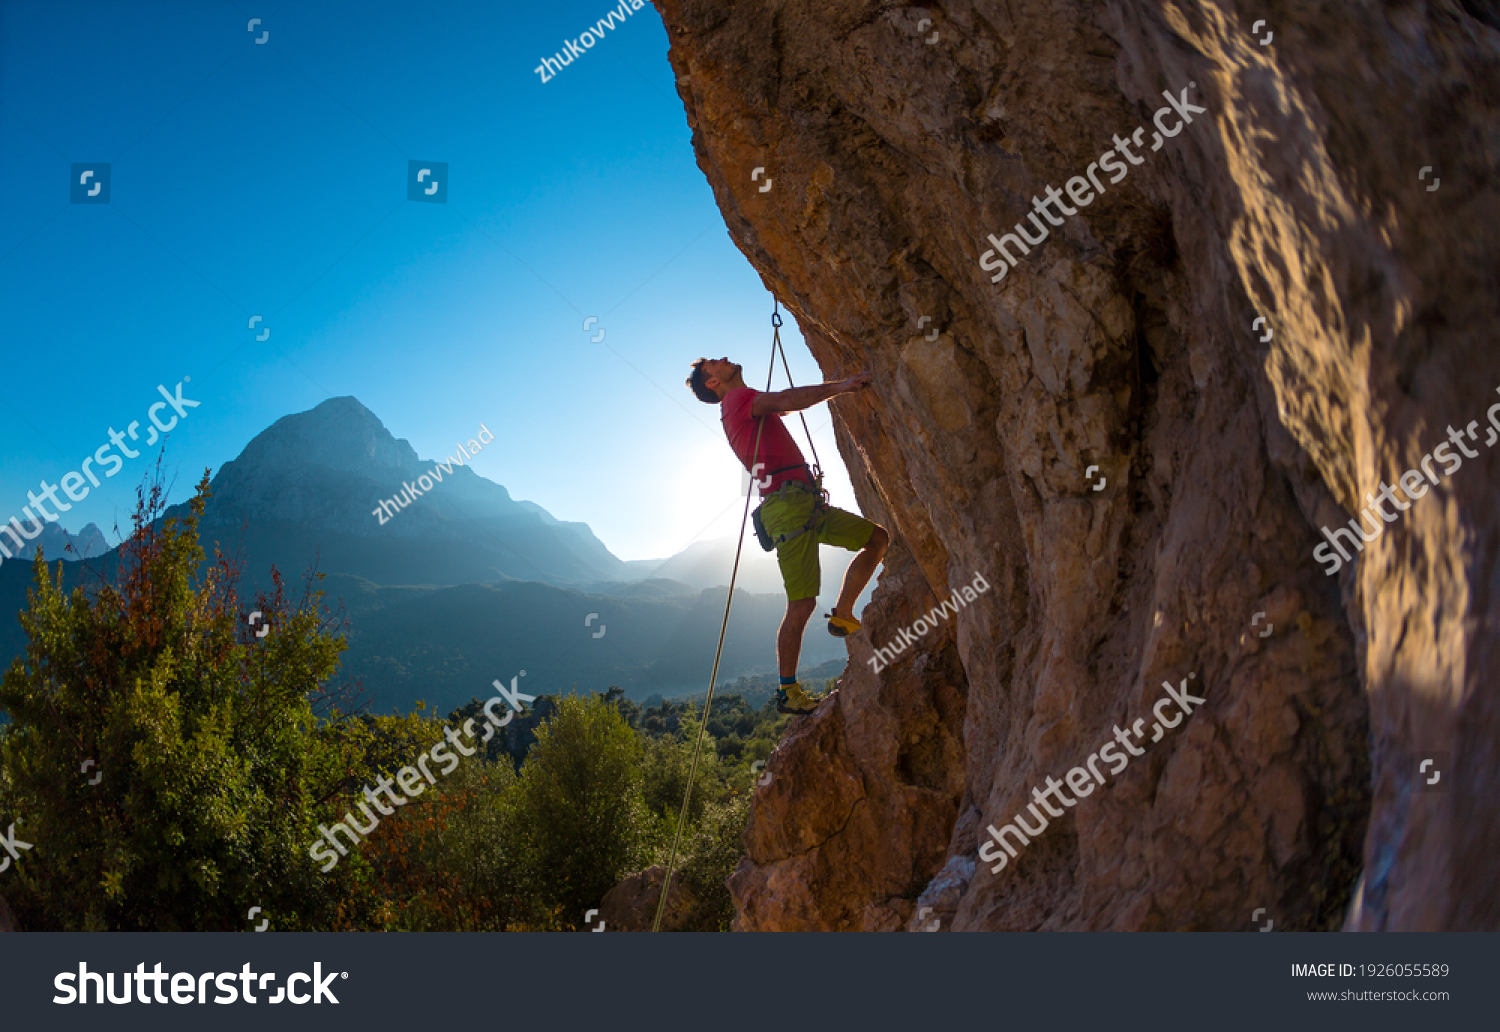 Athletic man climbs an overhanging rock with rope, lead climbing. silhouette of a rock climber on a mountain background. outdoor sports and recreation #1926055589